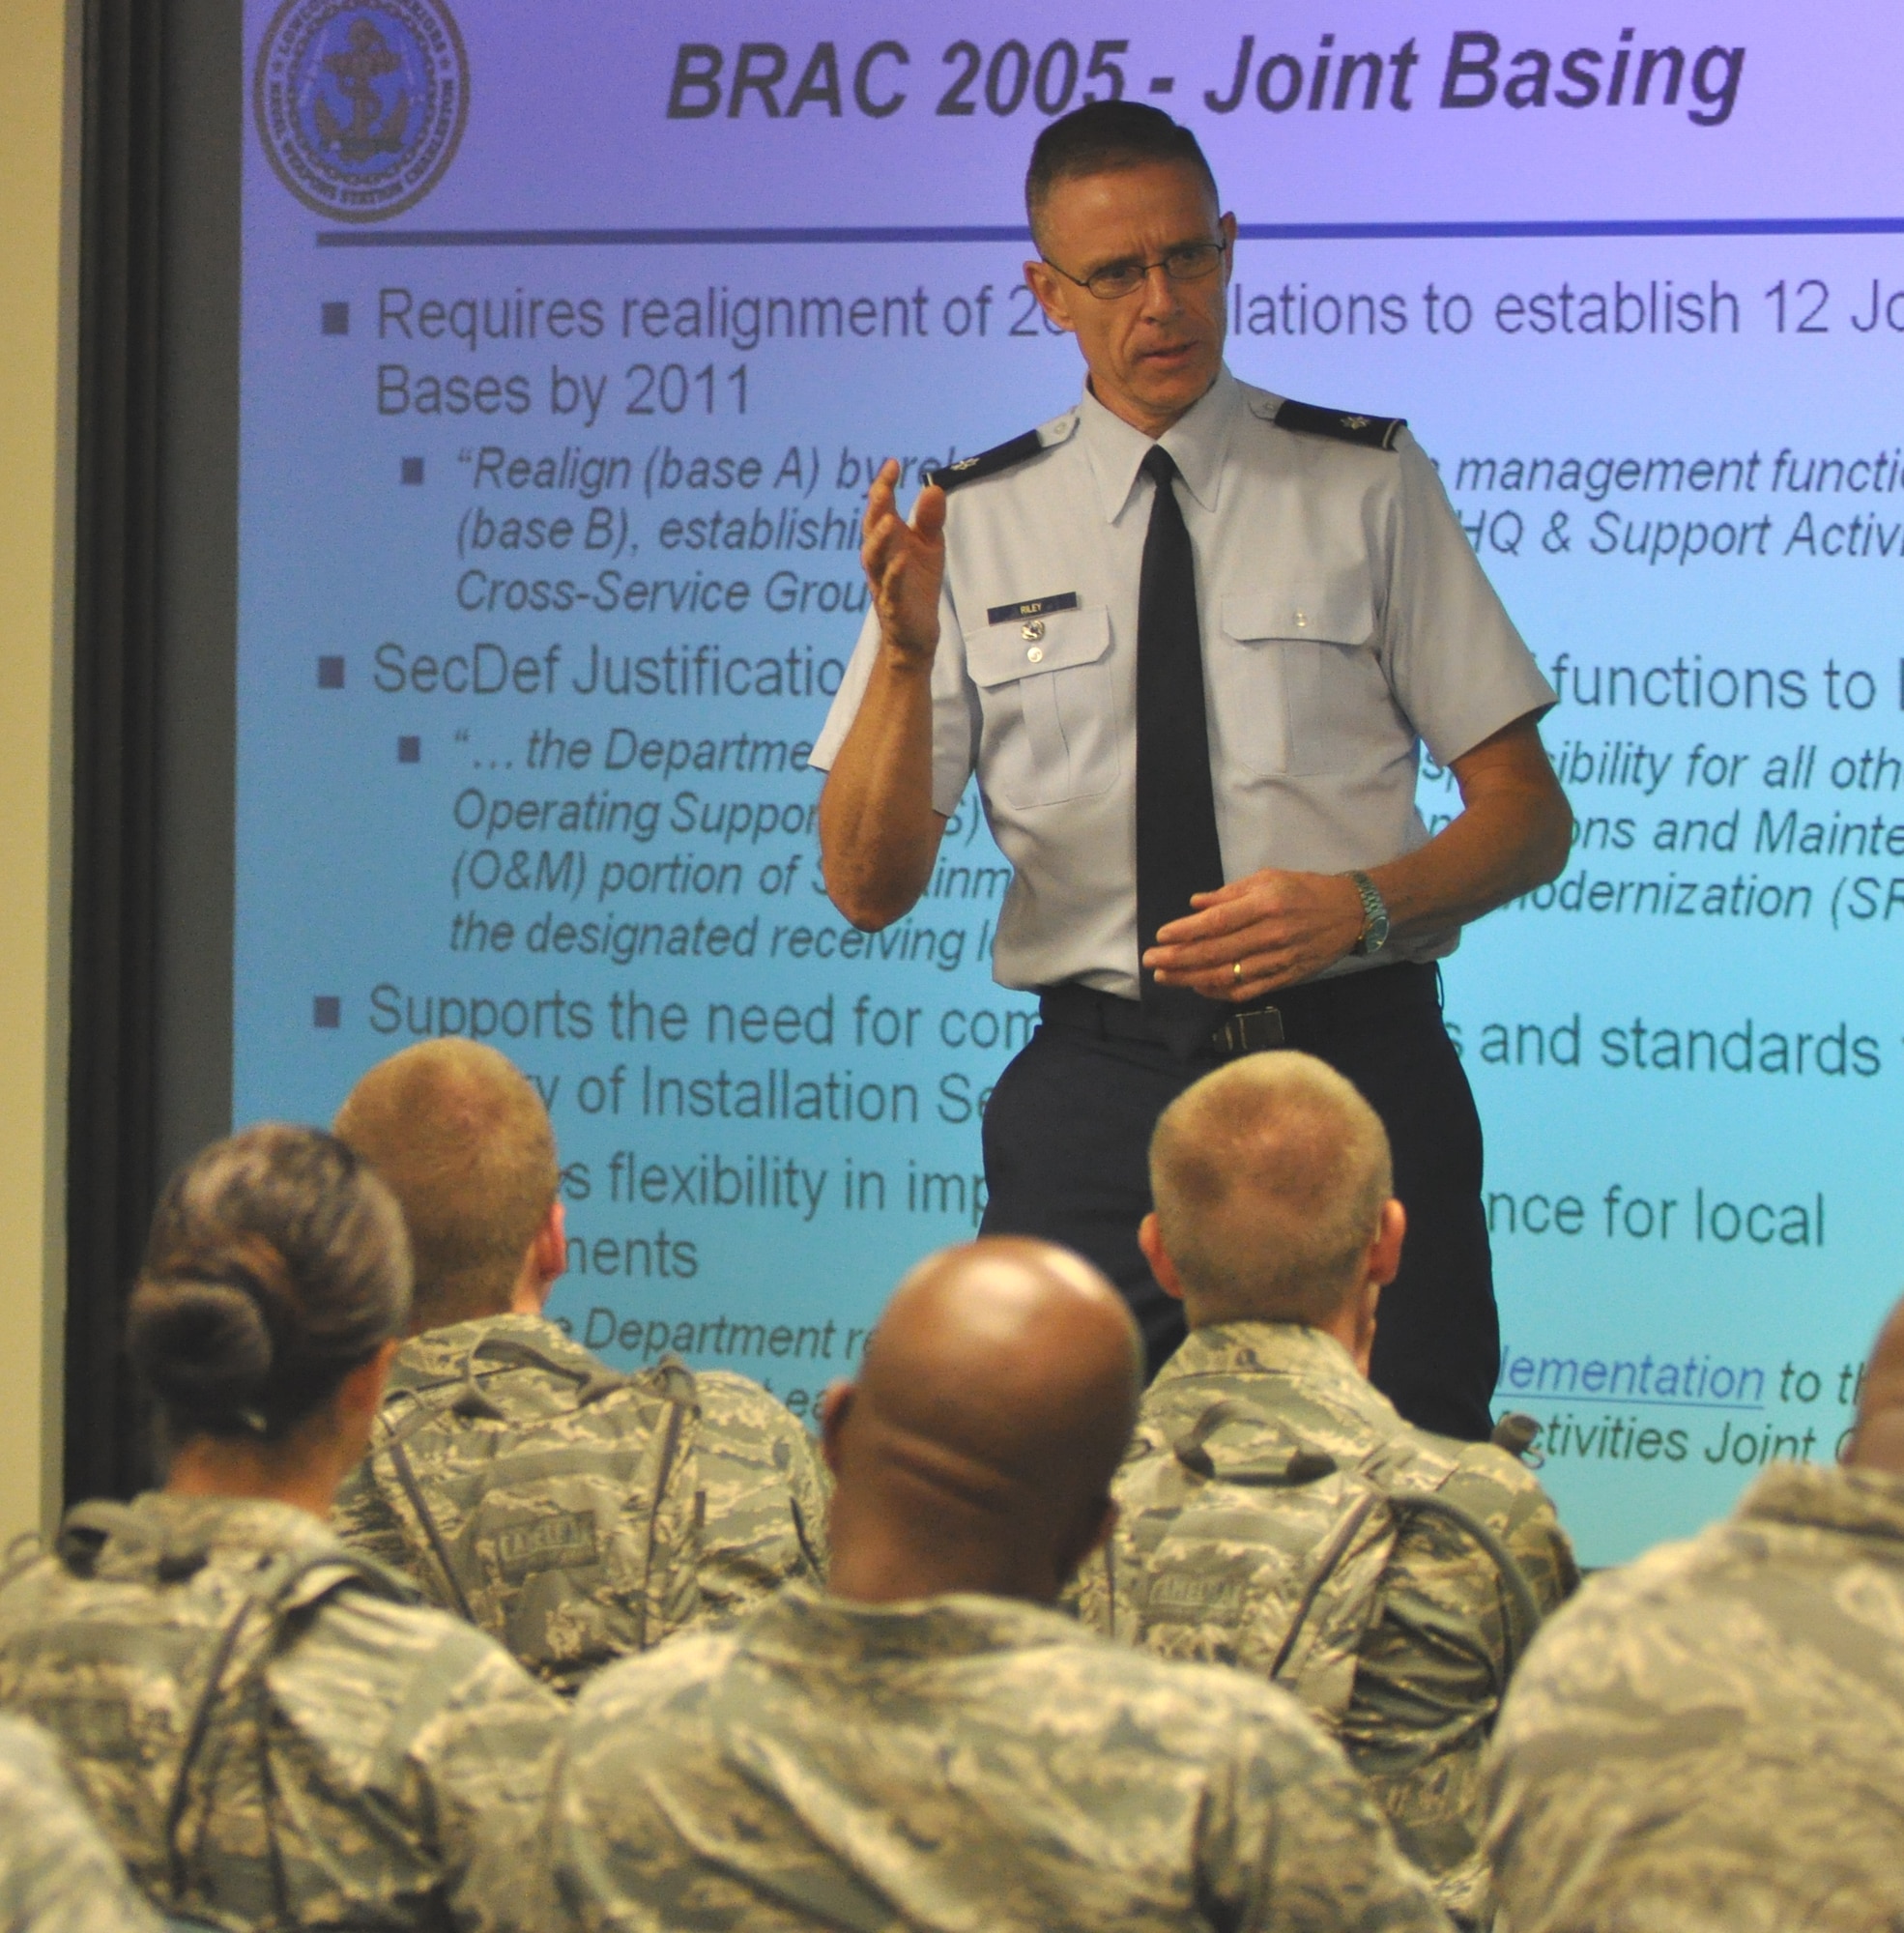 Lt. Col. Kevin Riley discusses operational structure and function of 628th Joint Base Charleston July 26, 2010, at Charleston Air Force Base, S.C., to 30 Air Force chaplain candidates. Lt. Col. Riley is the 628th Joint Base Charleston joint basing coordinator. (U.S. Air Force photo/Staff Sgt. Shane Ellis)